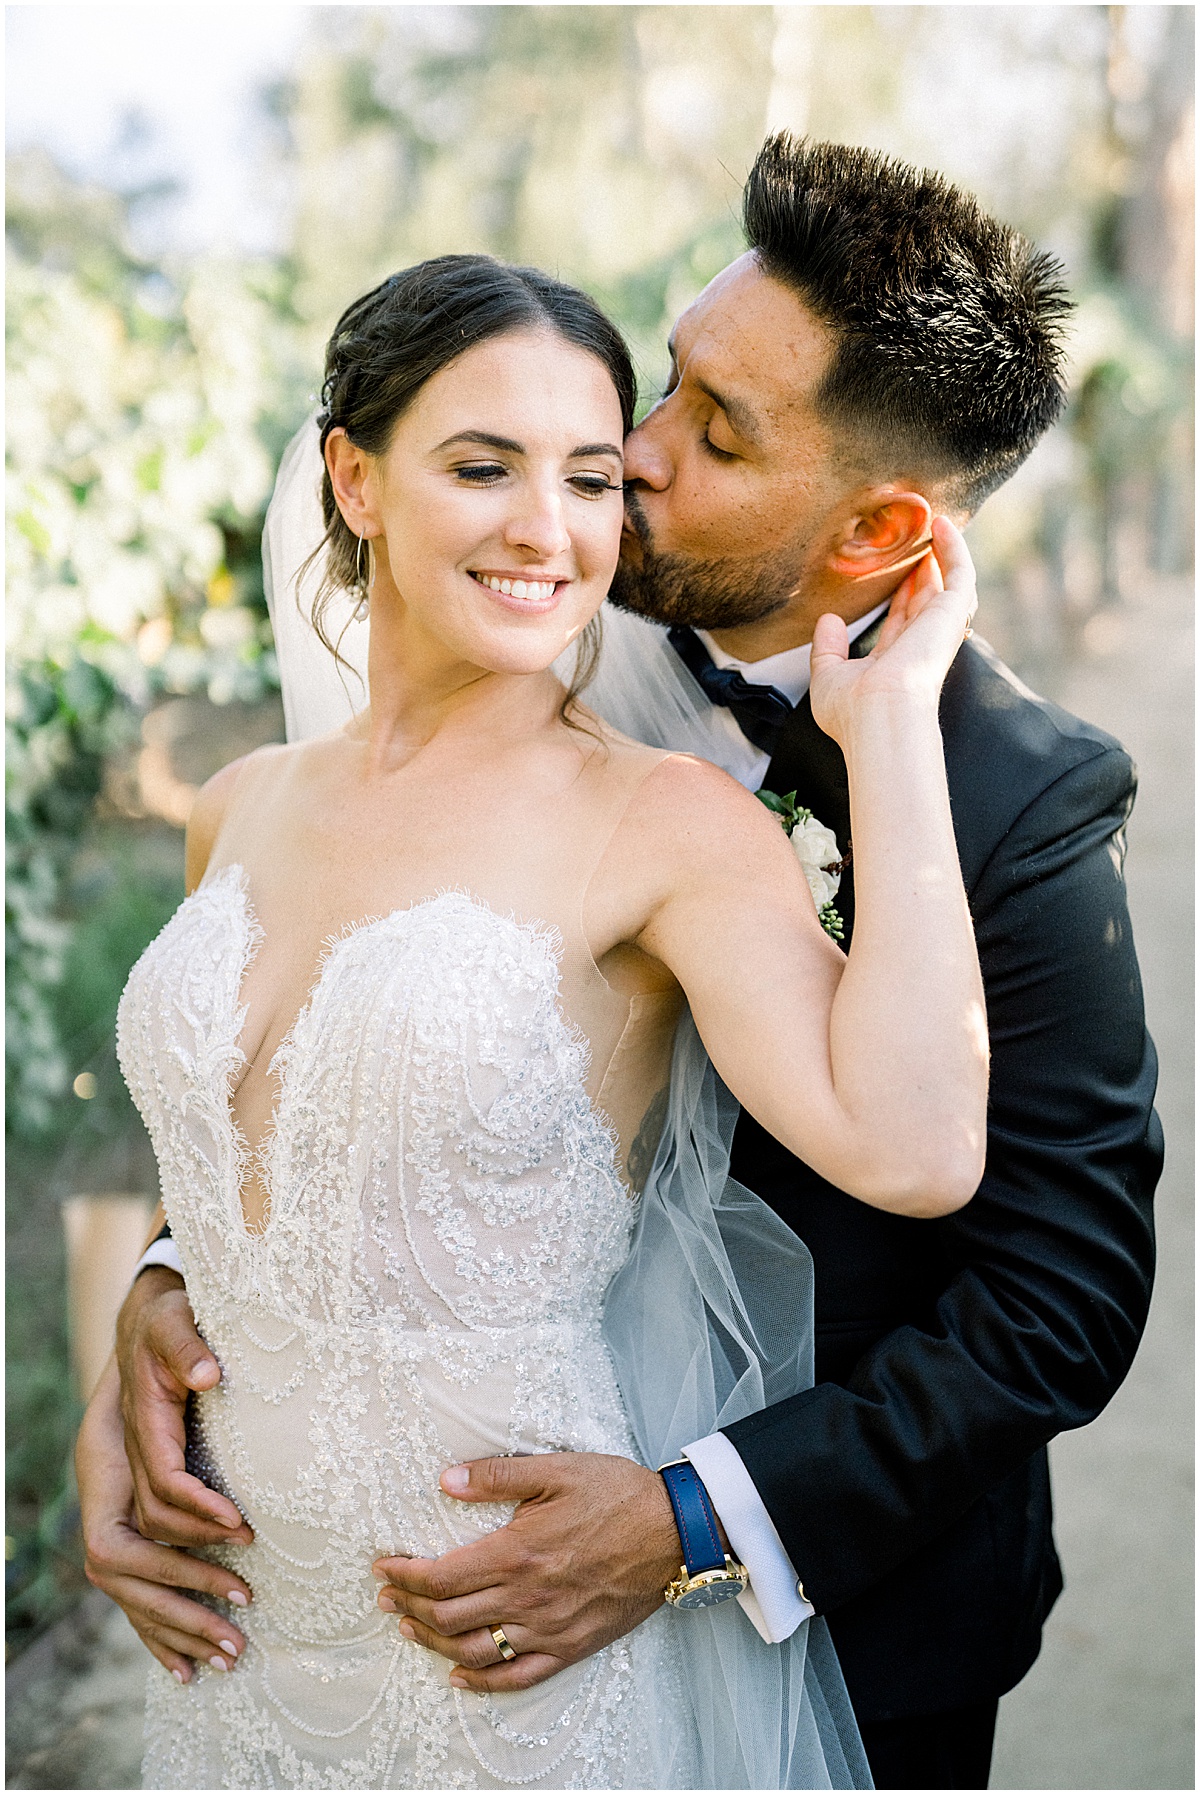 From Sobriety to Celebration - Mariah & Raul's Romantic Outdoor Wedding ...